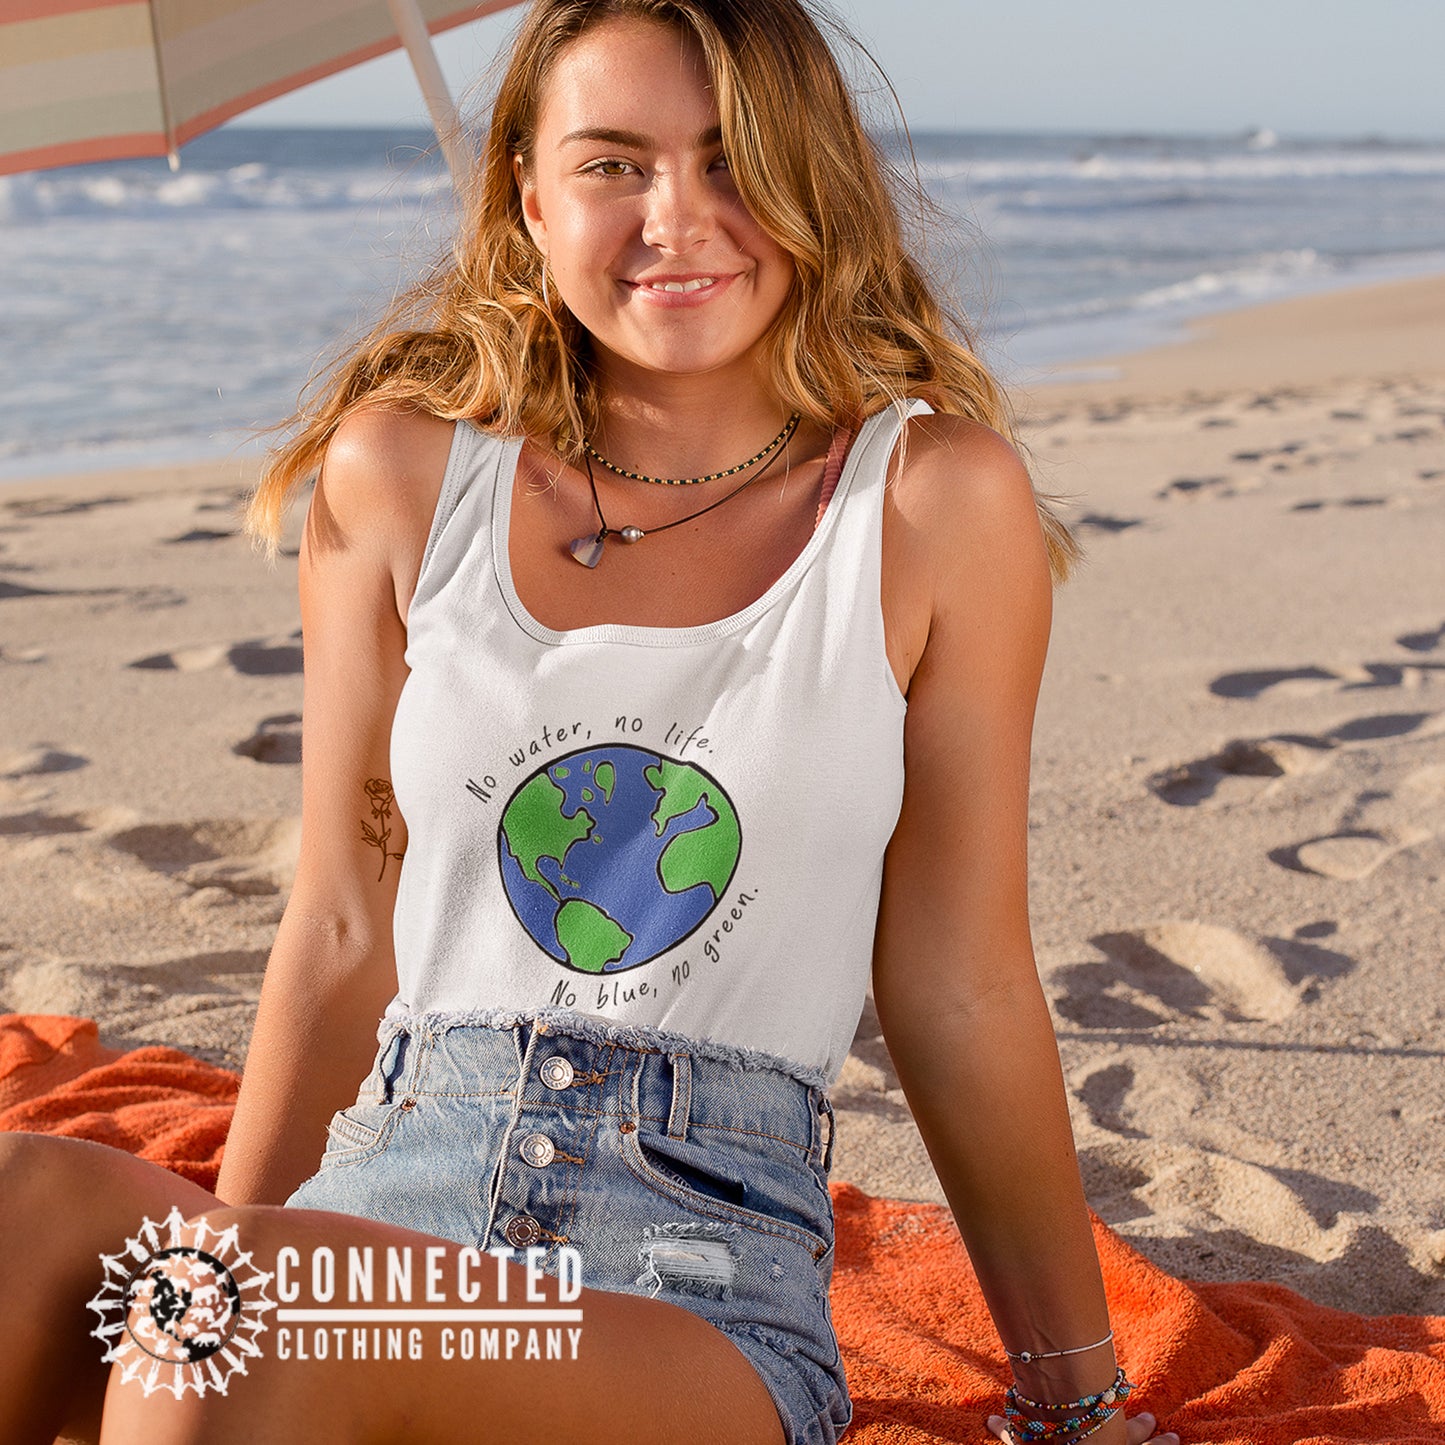 Model Wearing White No Blue No Green Women's Relaxed Tank - sweetsherriloudesigns - Ethically and Sustainably Made - 10% of profits donated to Mission Blue ocean conservation